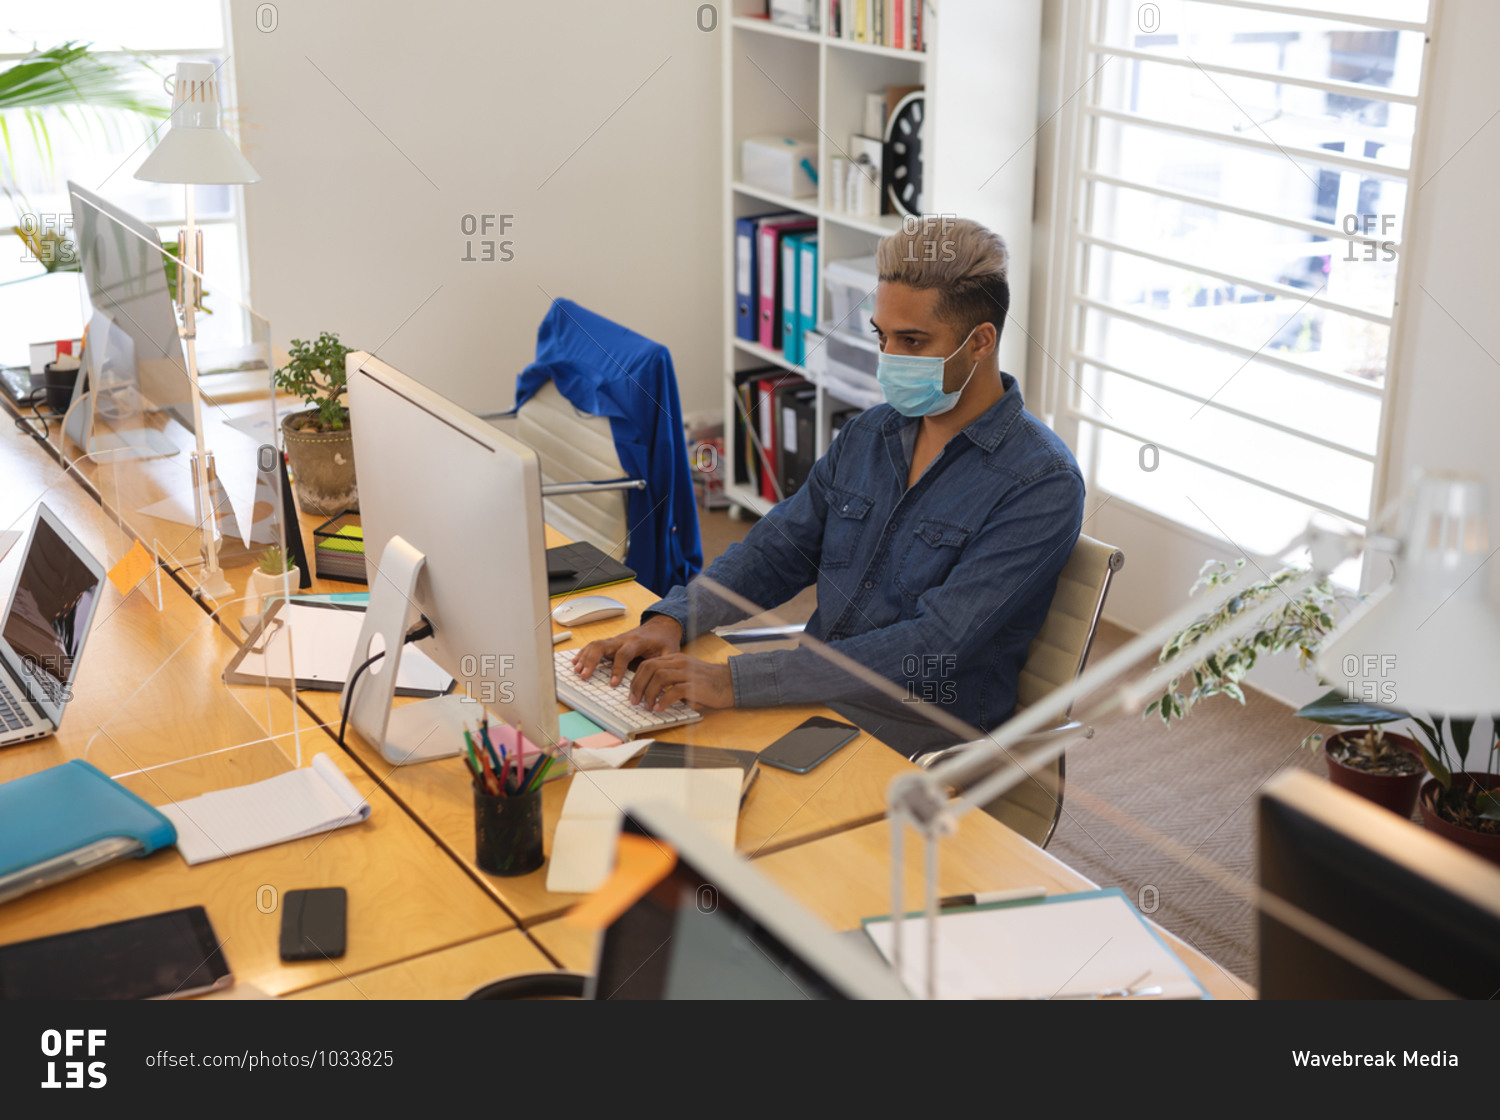 Mixed race male creative sitting at desk in a modern office, wearing a face mask and using a computer. Health and hygiene in the workplace during Coronavirus Covid 19 pandemic.